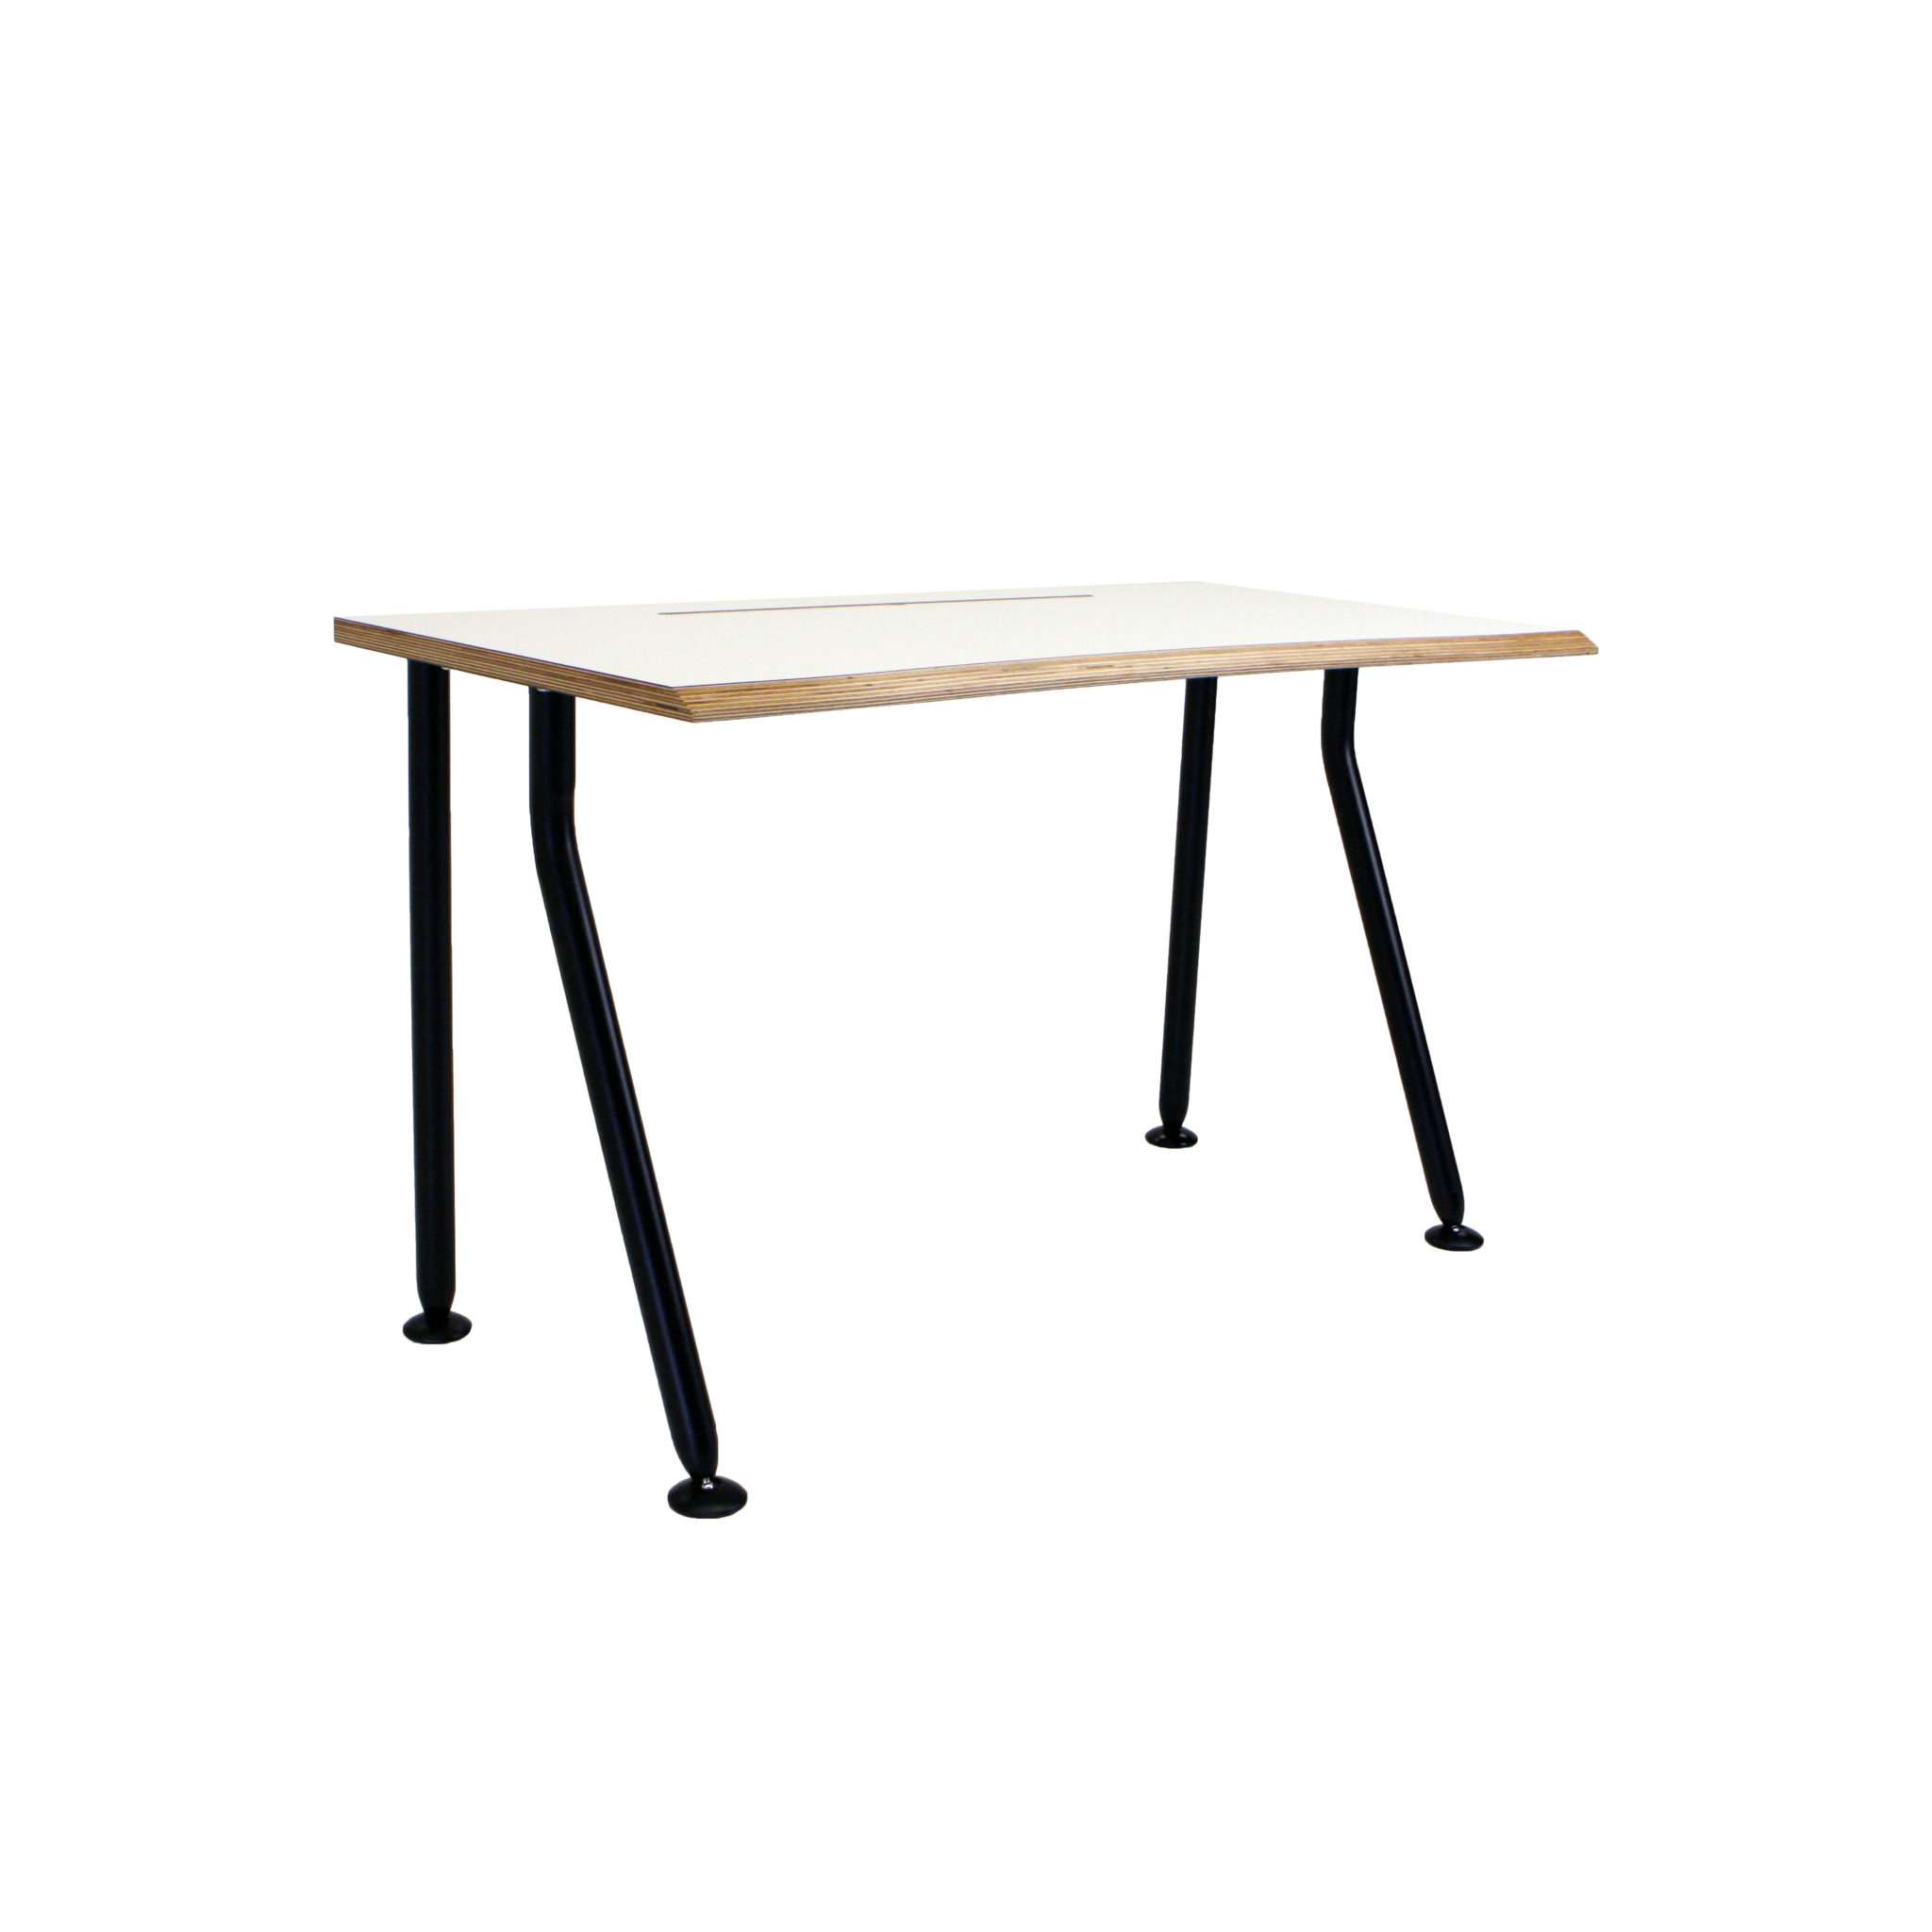 Rectangular desk 1000 x 600 x 740mm, with a four legged frame and a polished plywood top finish